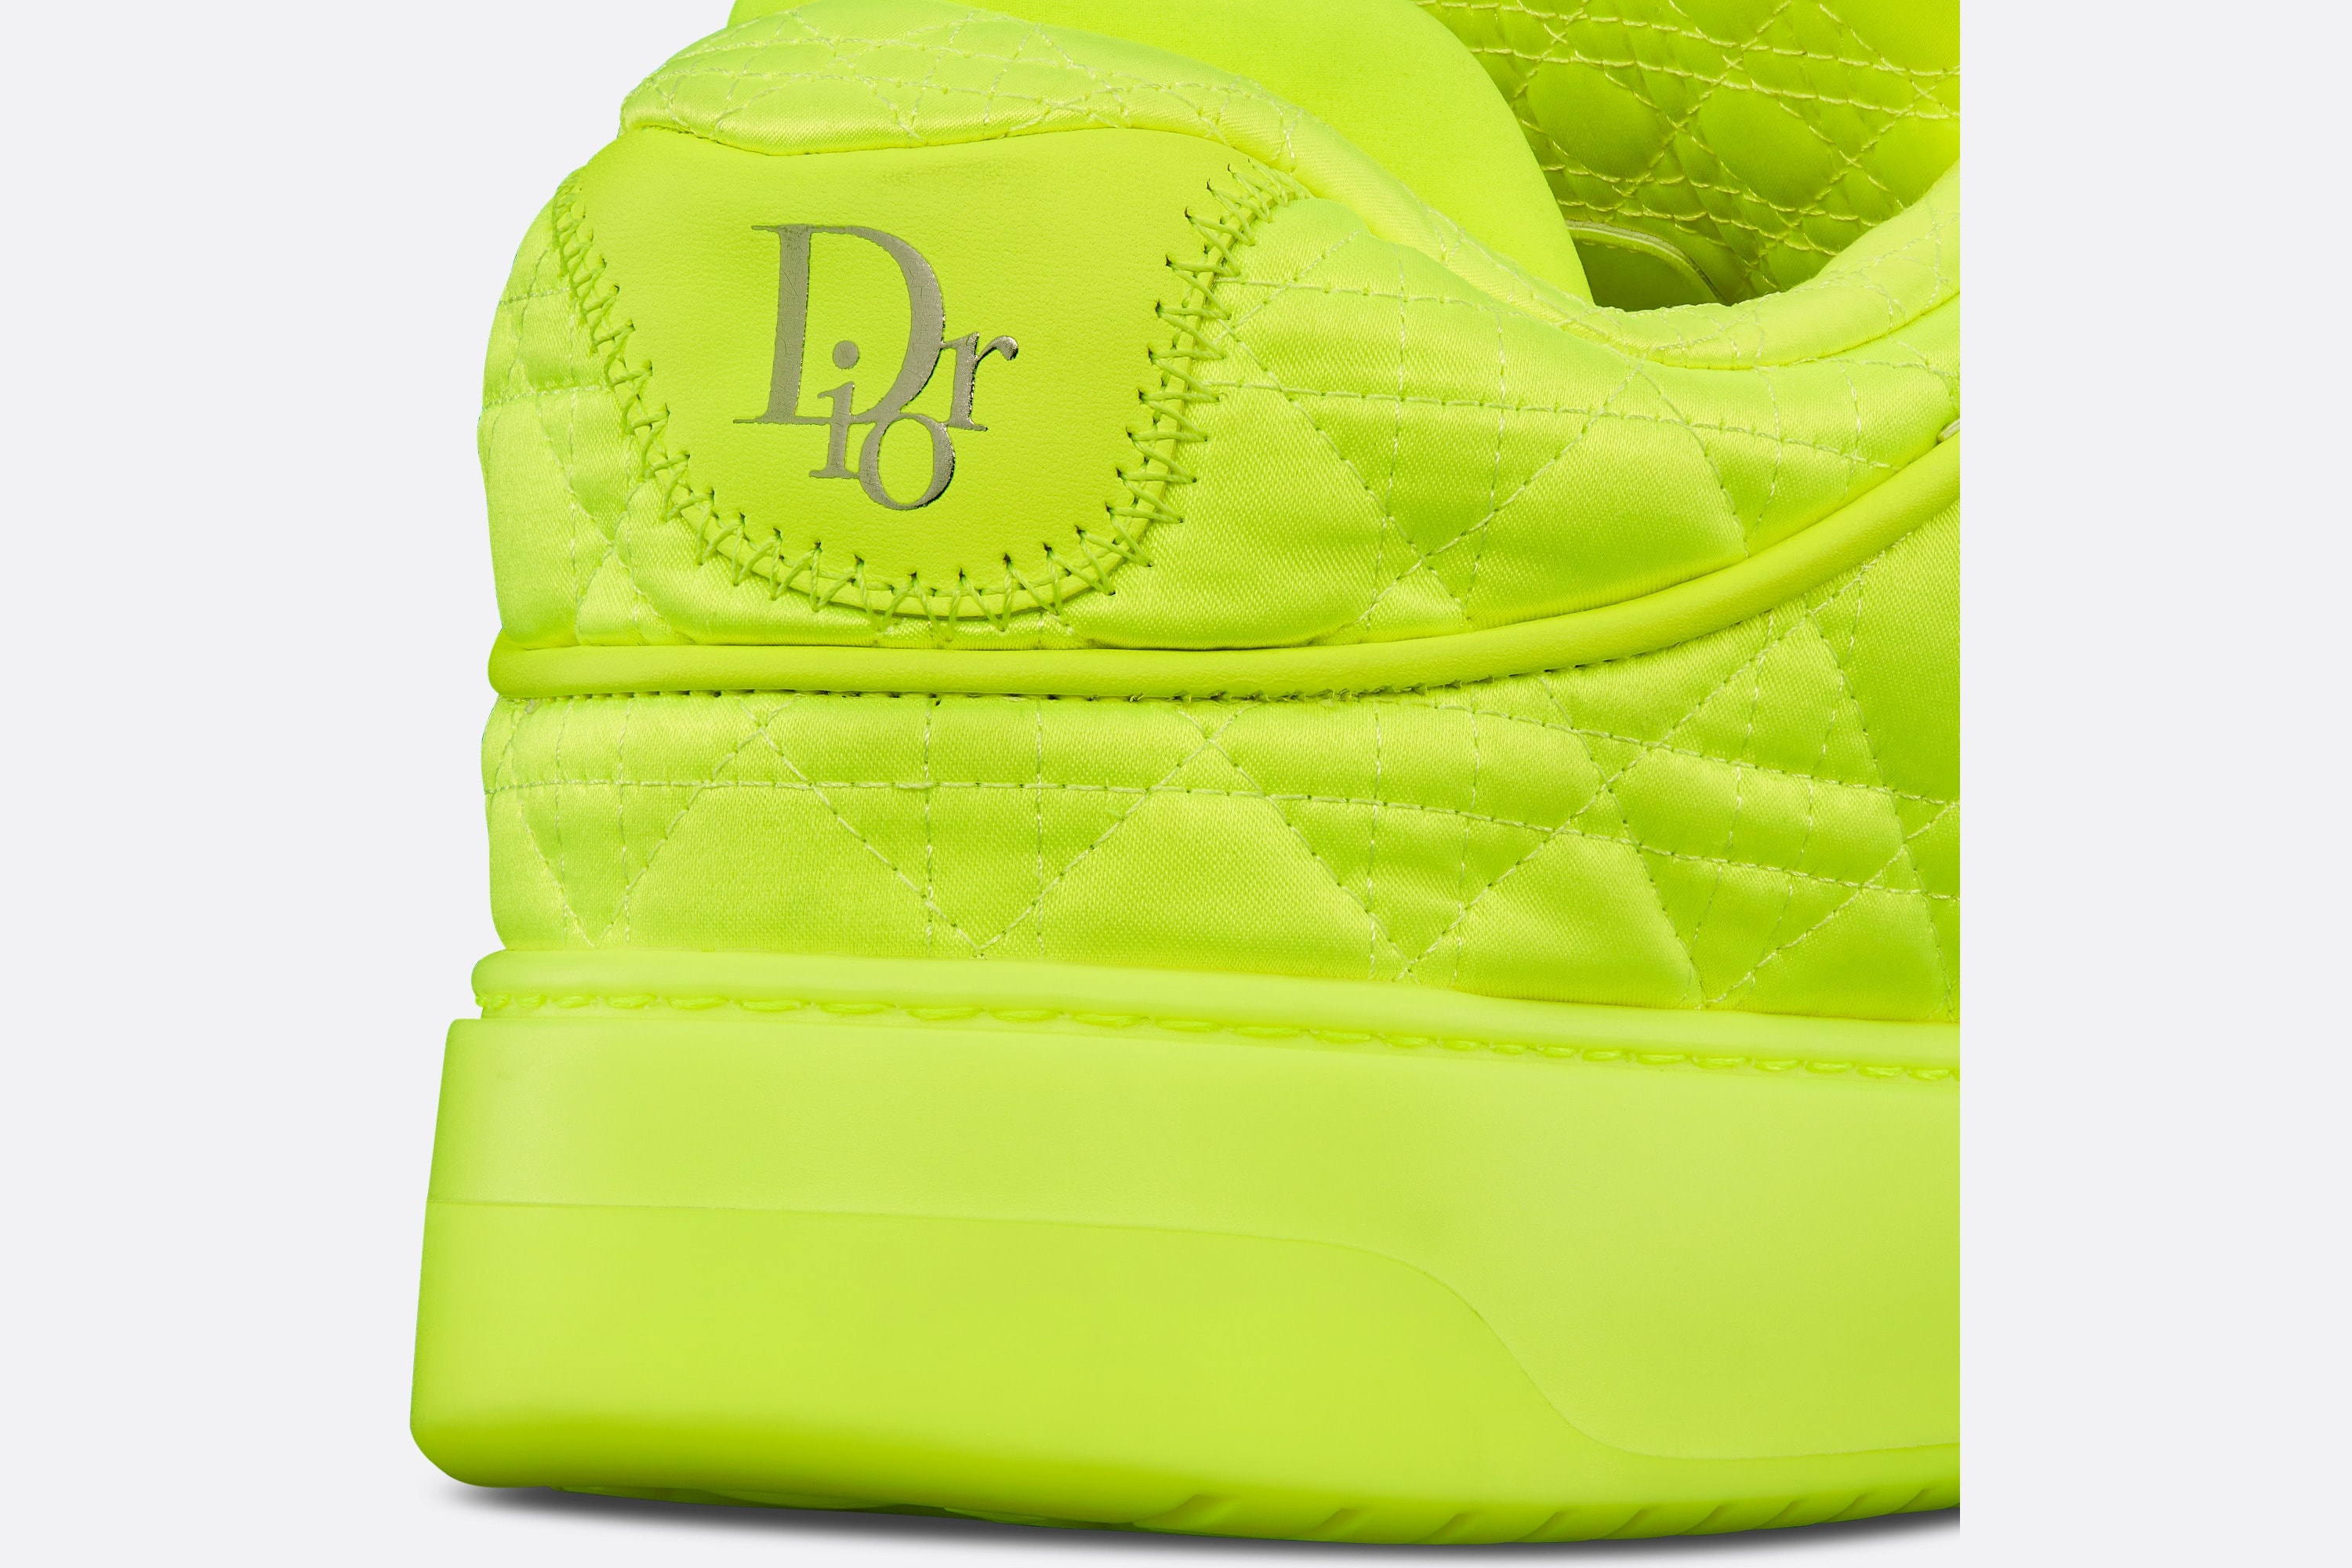 B9S Skater Sneaker, LIMITED AND NUMBERED EDITION - 7